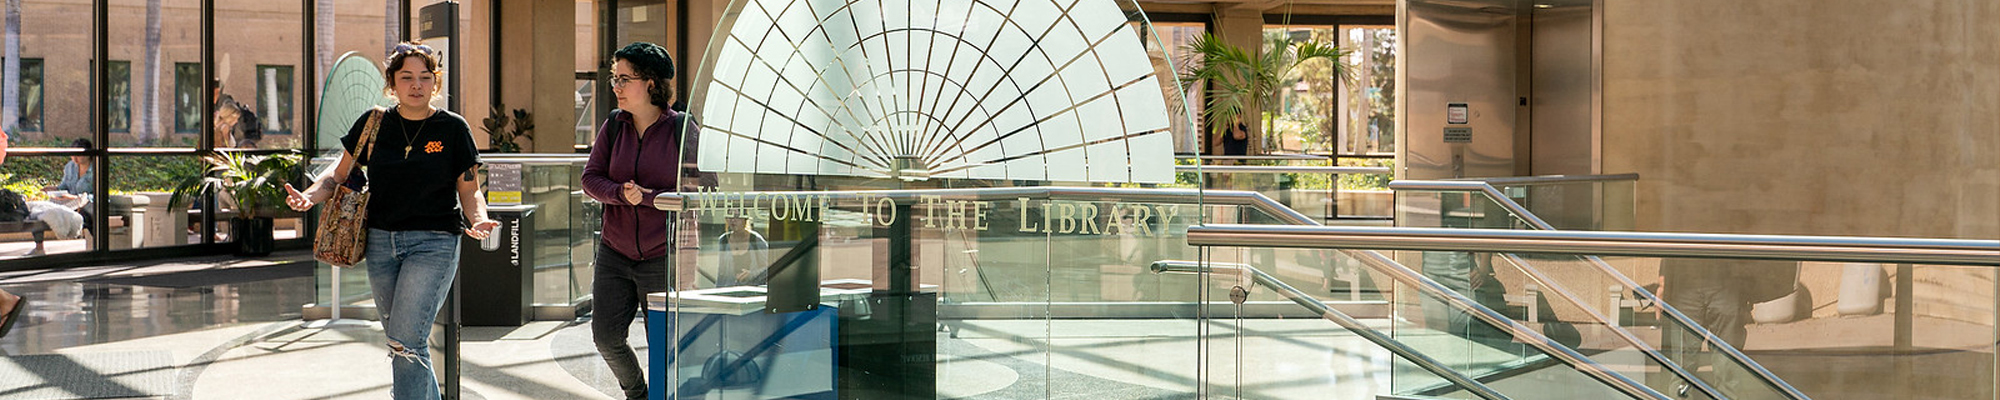 SDSU library entrance, welcome to the library